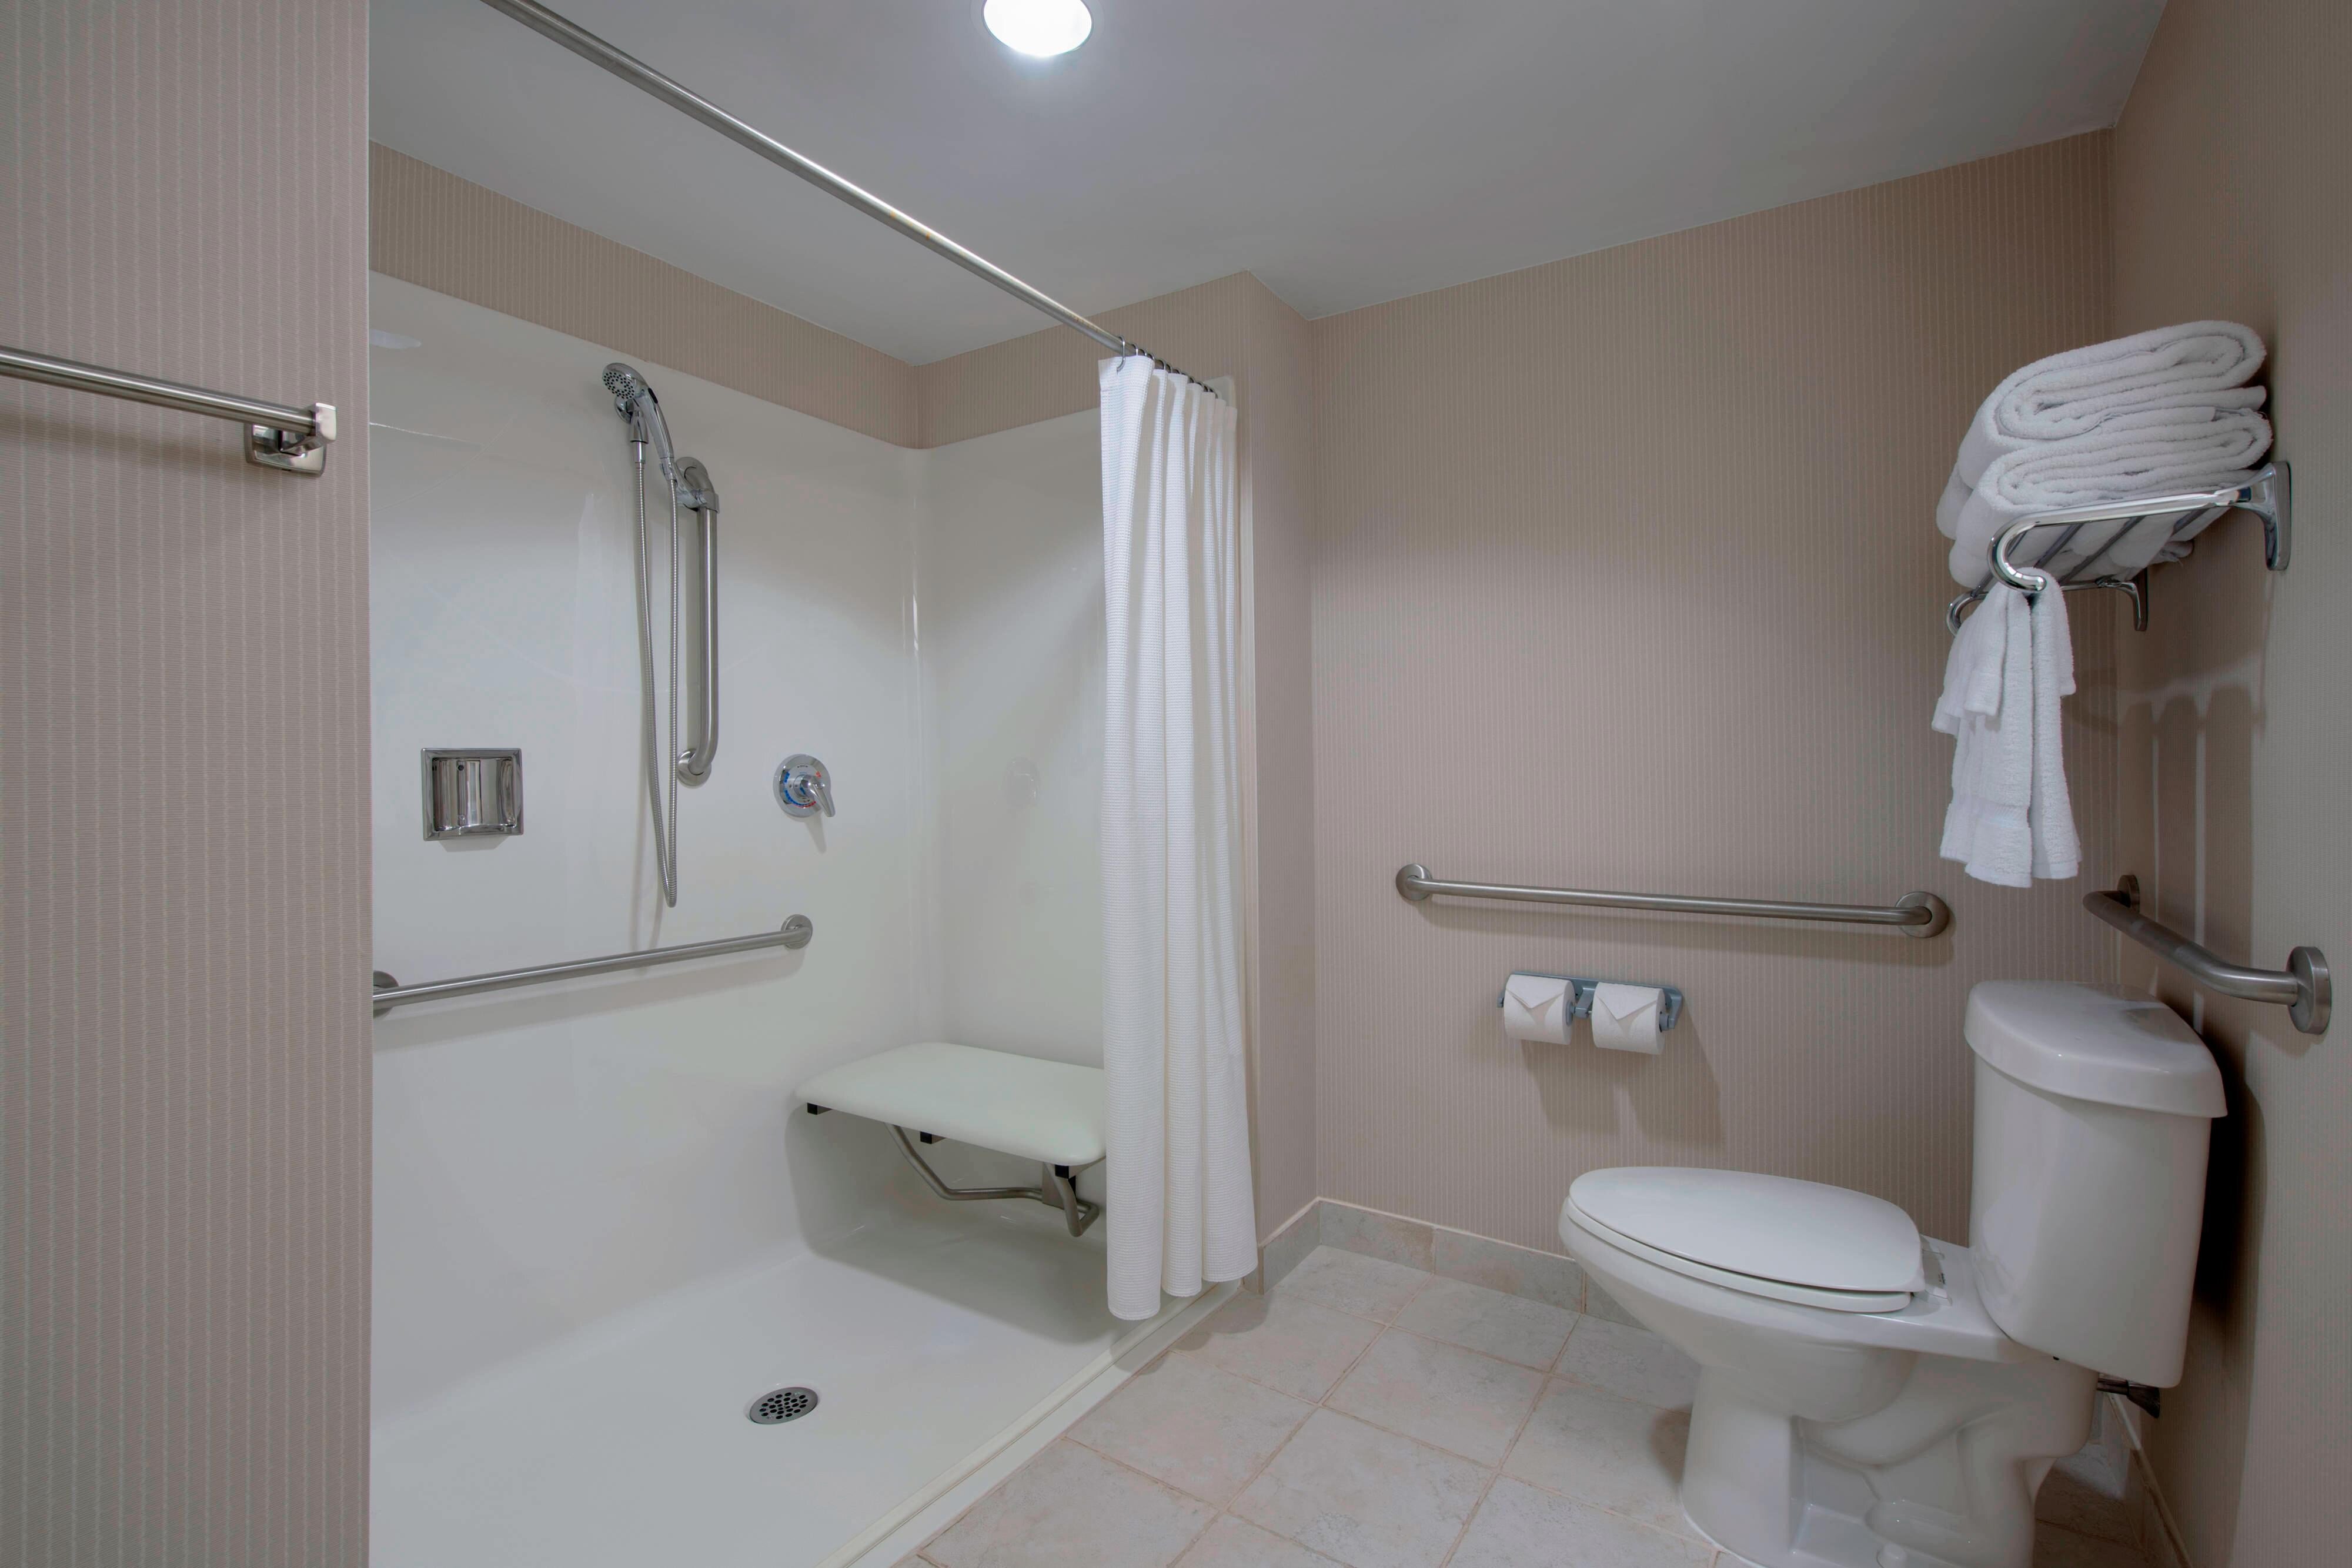 Accessible Guest Room Bathroom - Roll-In Shower